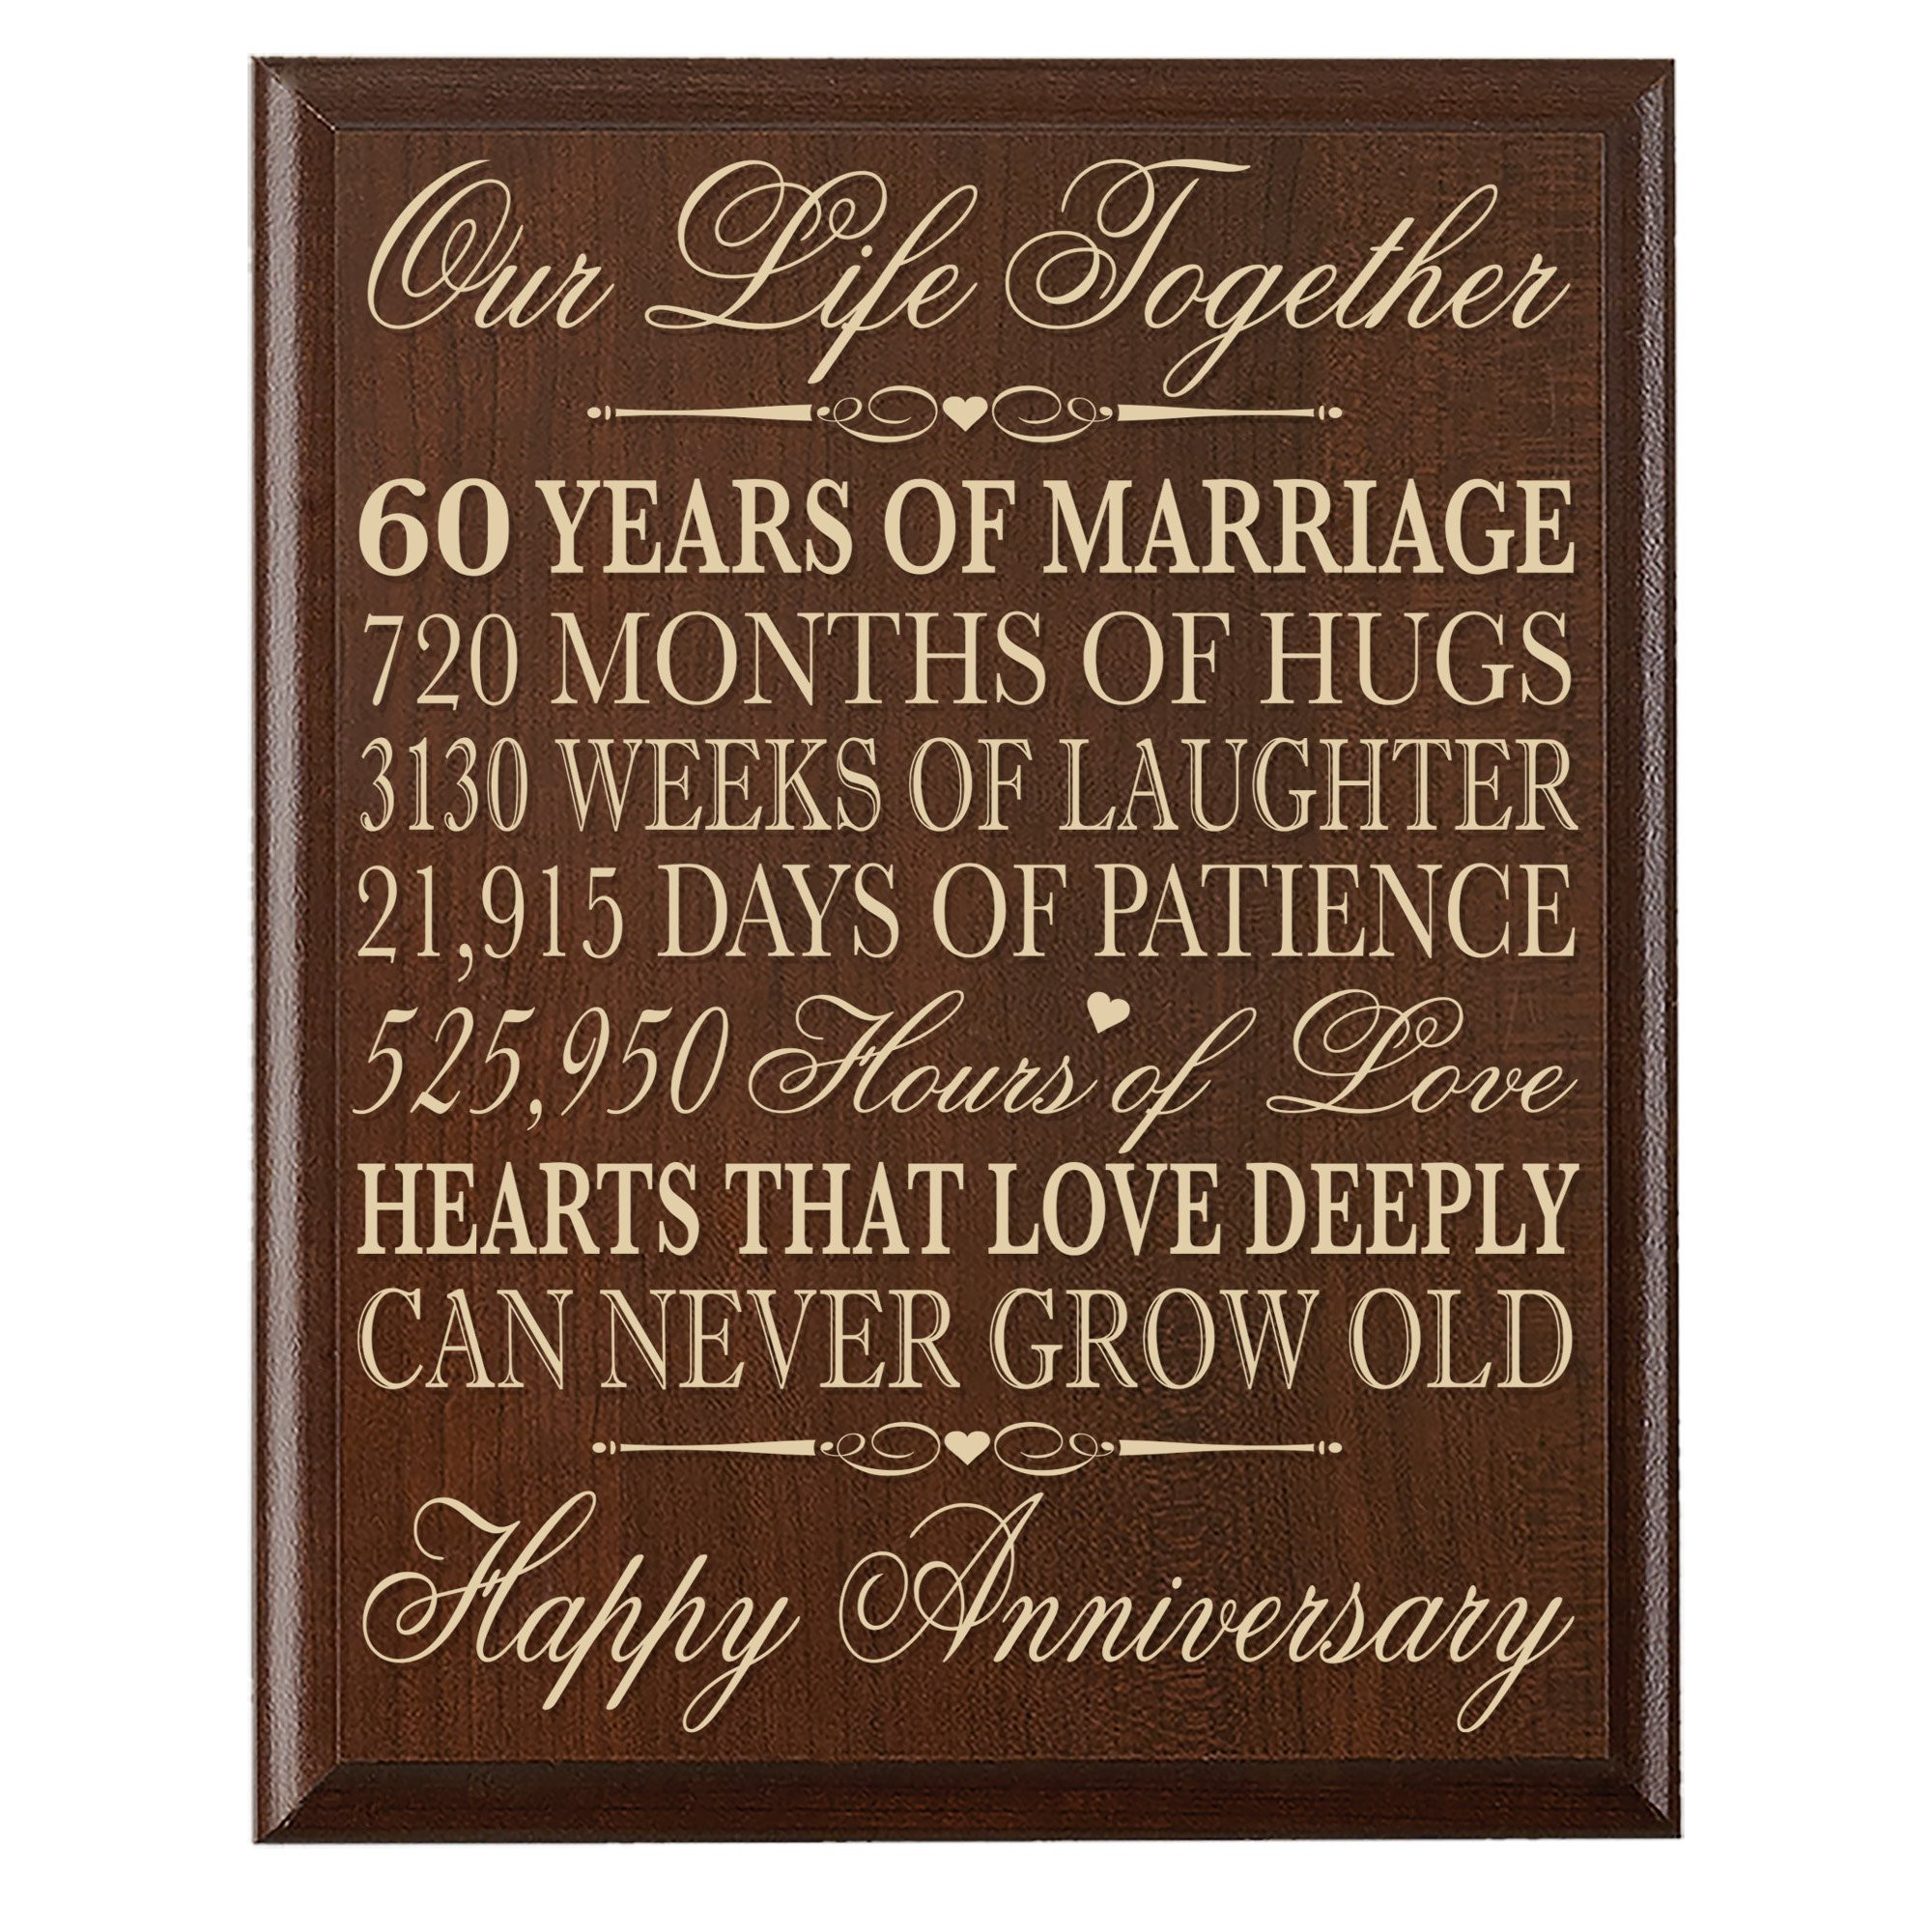 60Th Anniversary Gift Ideas
 60th Wedding Anniversary Wall Plaque Gifts for Couple